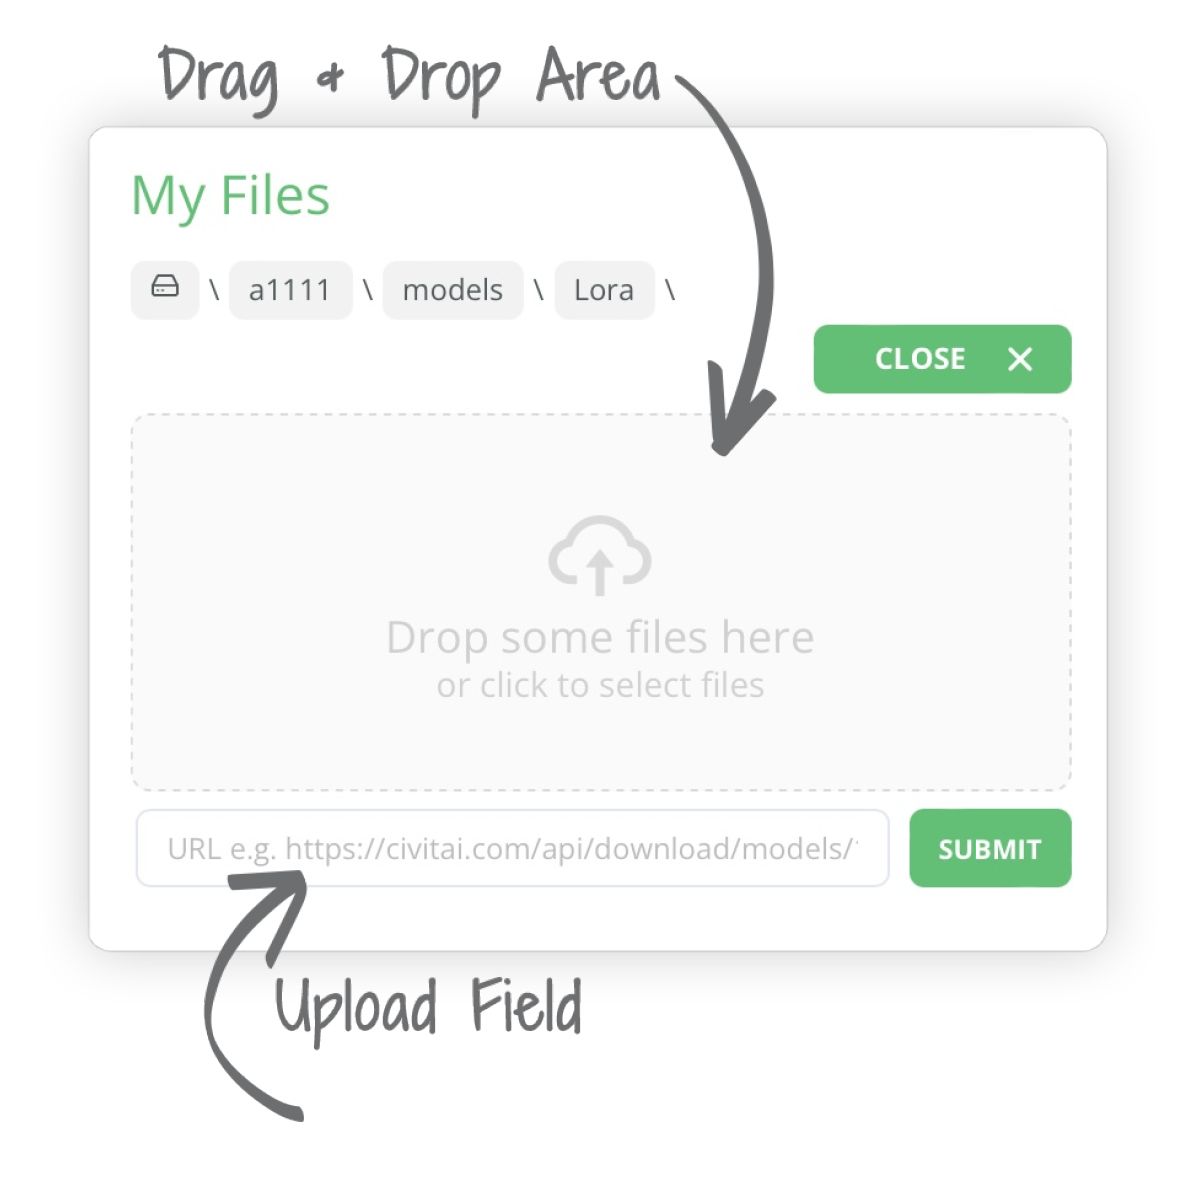 Uploading files to ThinkDiffusion from Civitai or Huggingface through Drag and Drop and Uploading by URL functionality